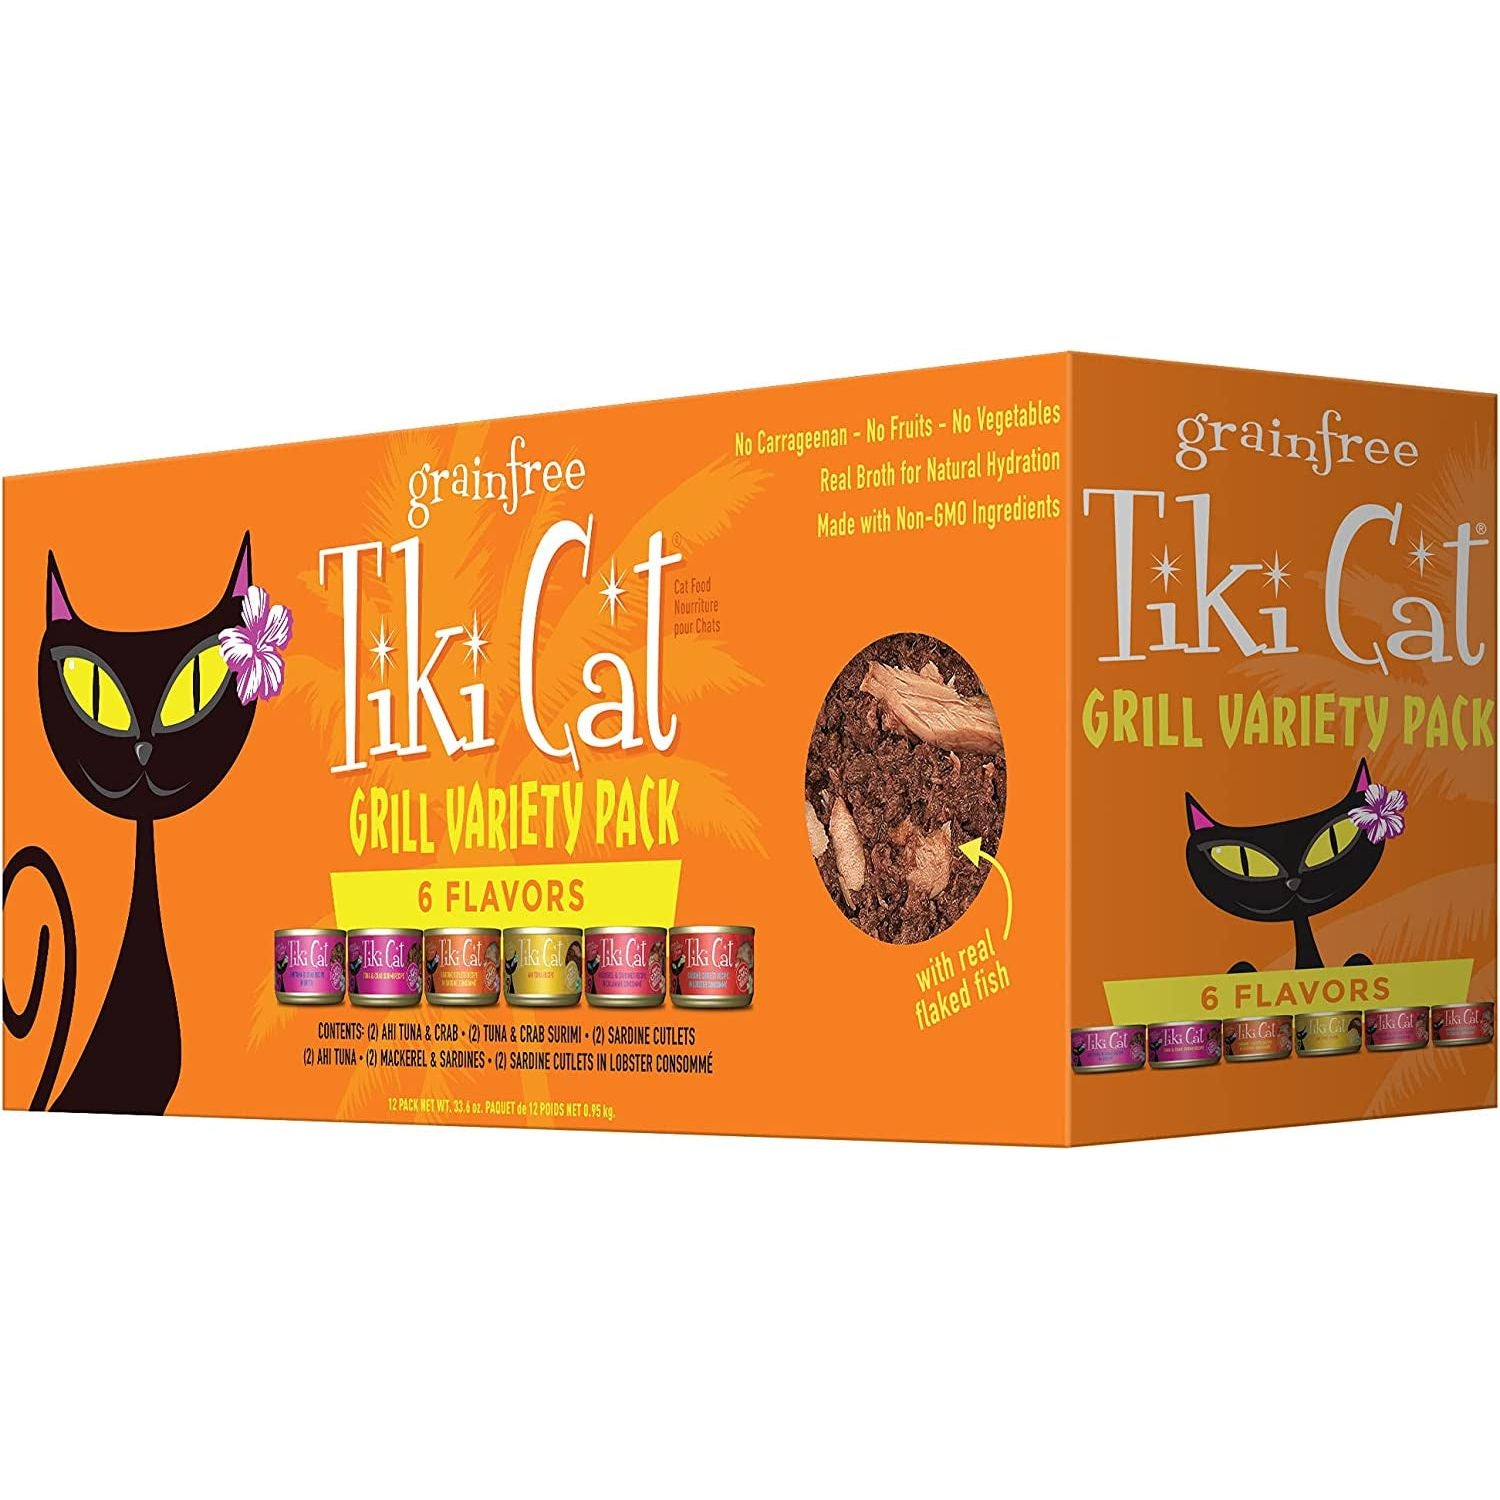 Tiki Cat Grill, Tuna & Crab Surimi, High-Protein and 100% Non-Gmo Ingredients, Wet Whole Foods Cat Food for All Life Stages, 2.8 Oz. Cans (Case of 12)